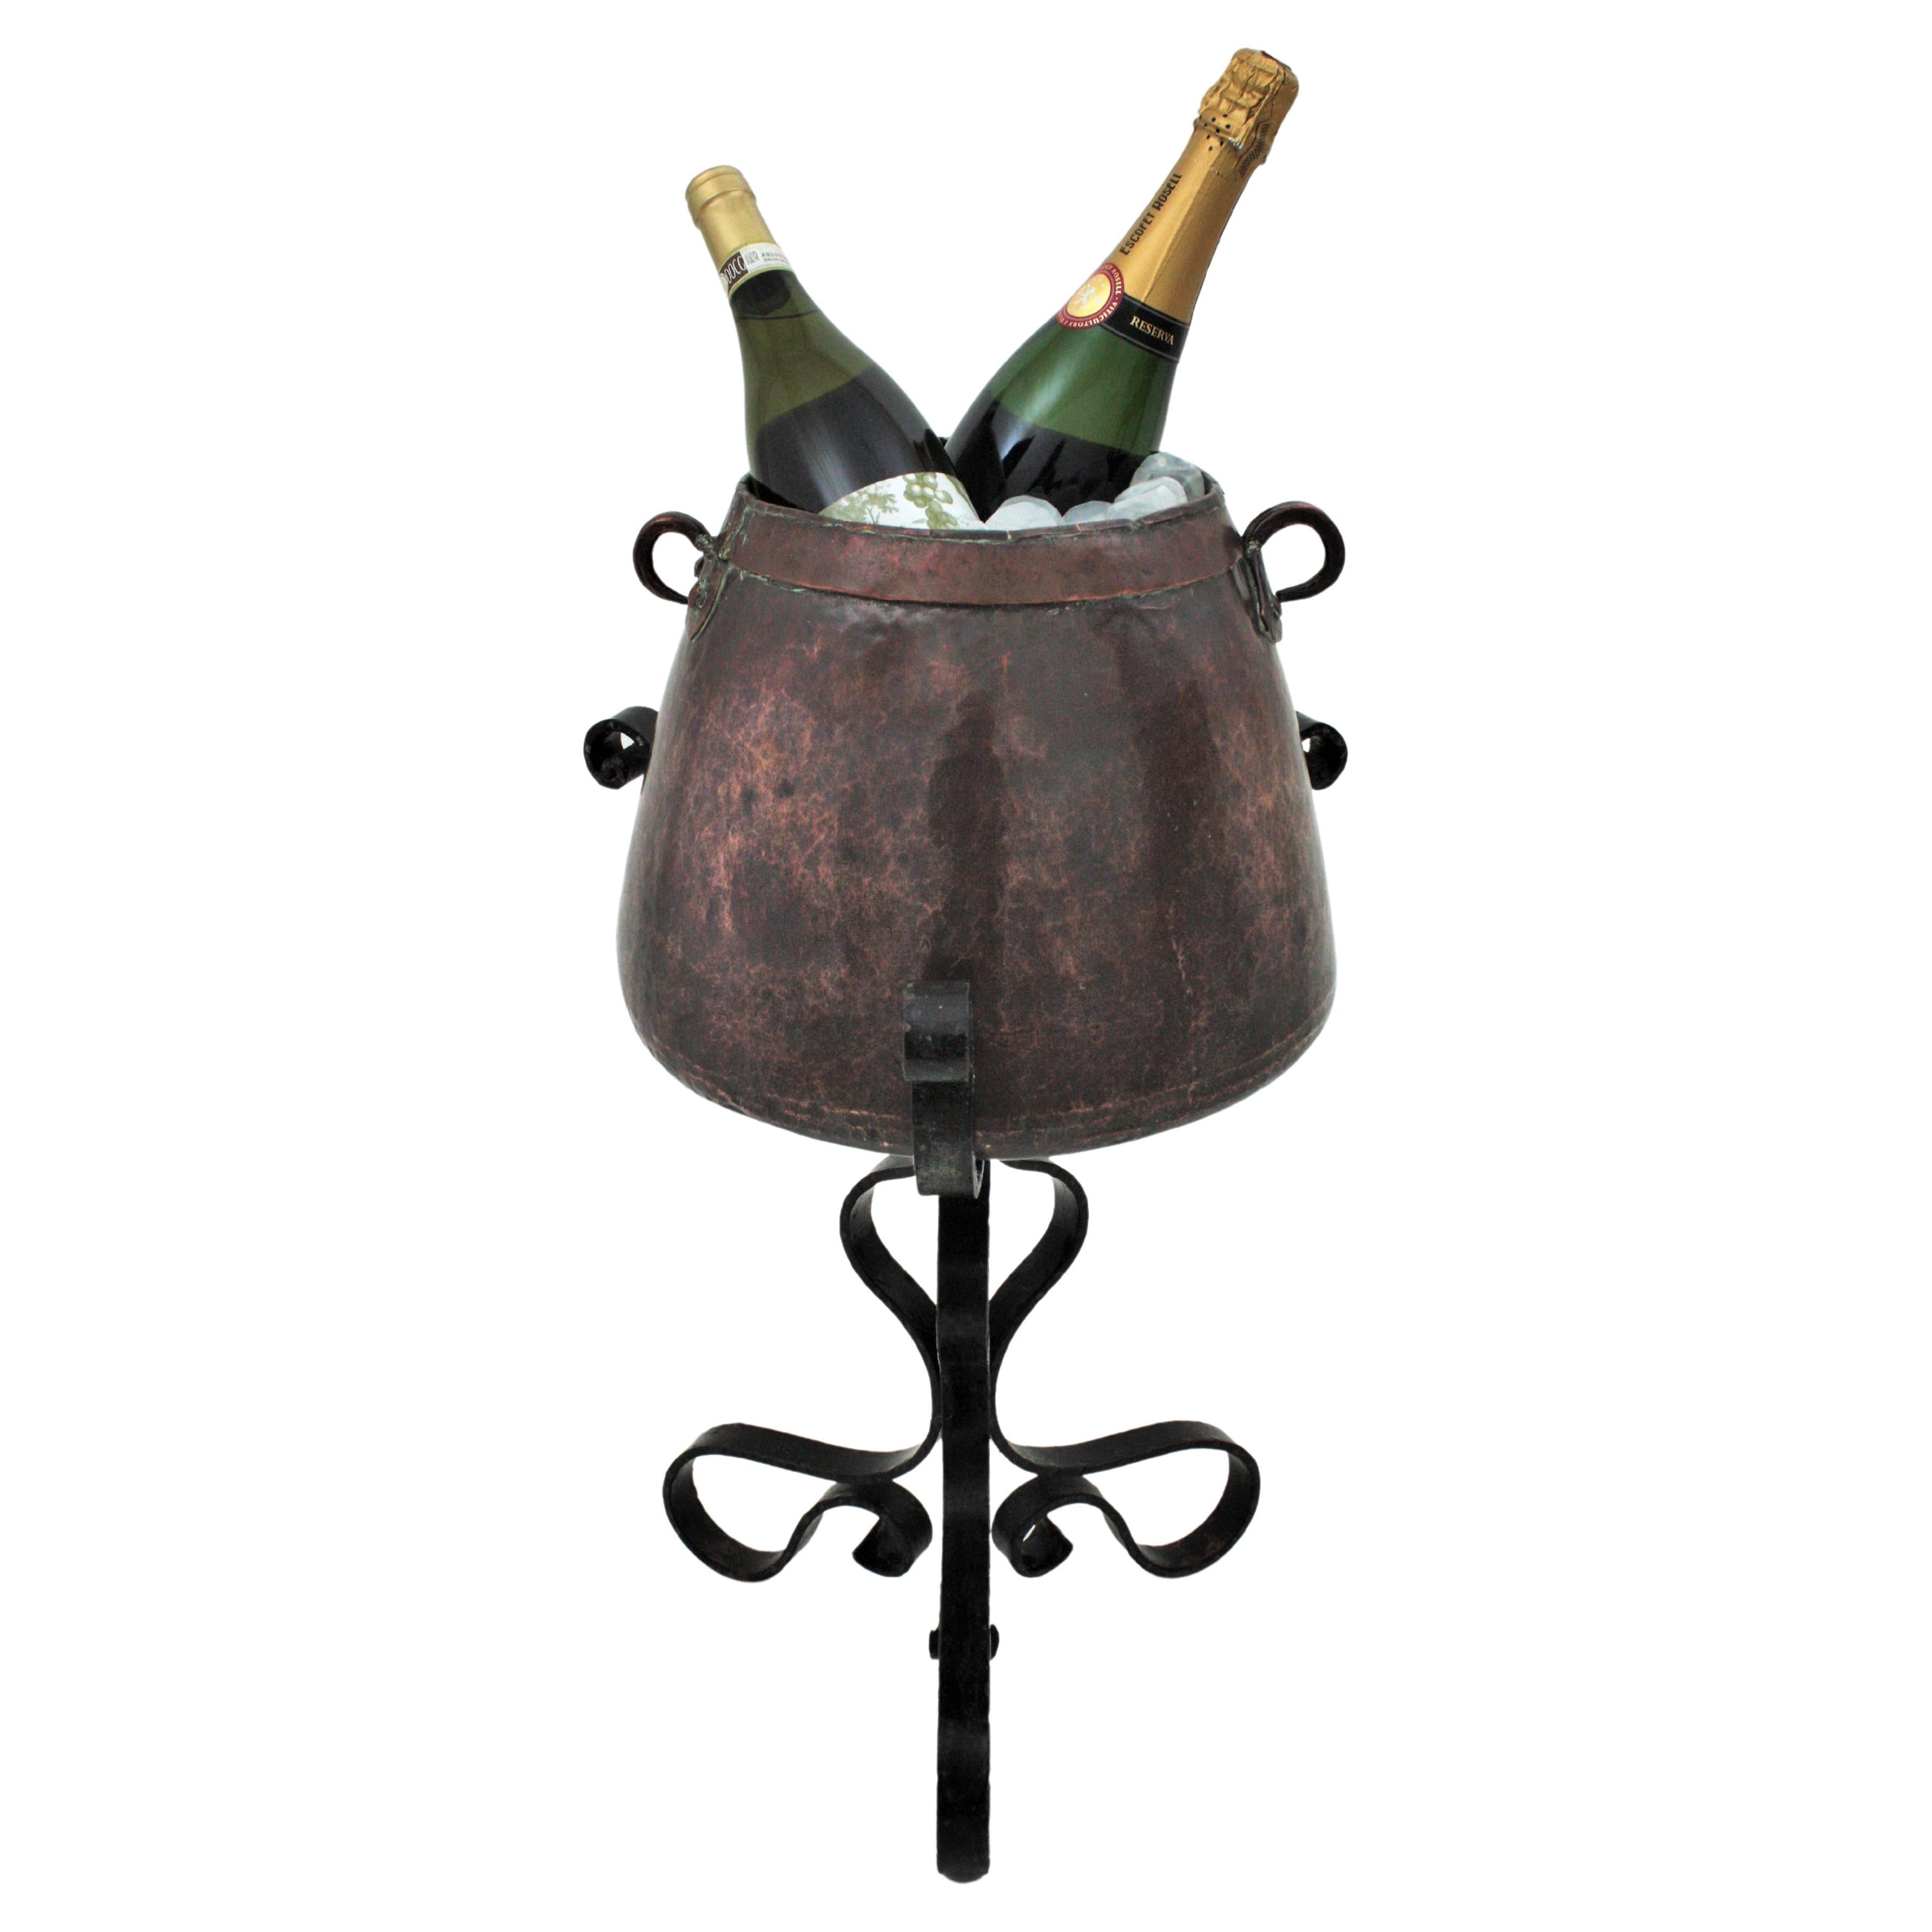 One of a kind hand forged copper and iron cauldron wine cooler on stand, Spain, 1920s-1930s.
This tripod stand champagne serving set is all made by hand. The handwrought iron stand has a tripod base with loop shaped feet and supports a large